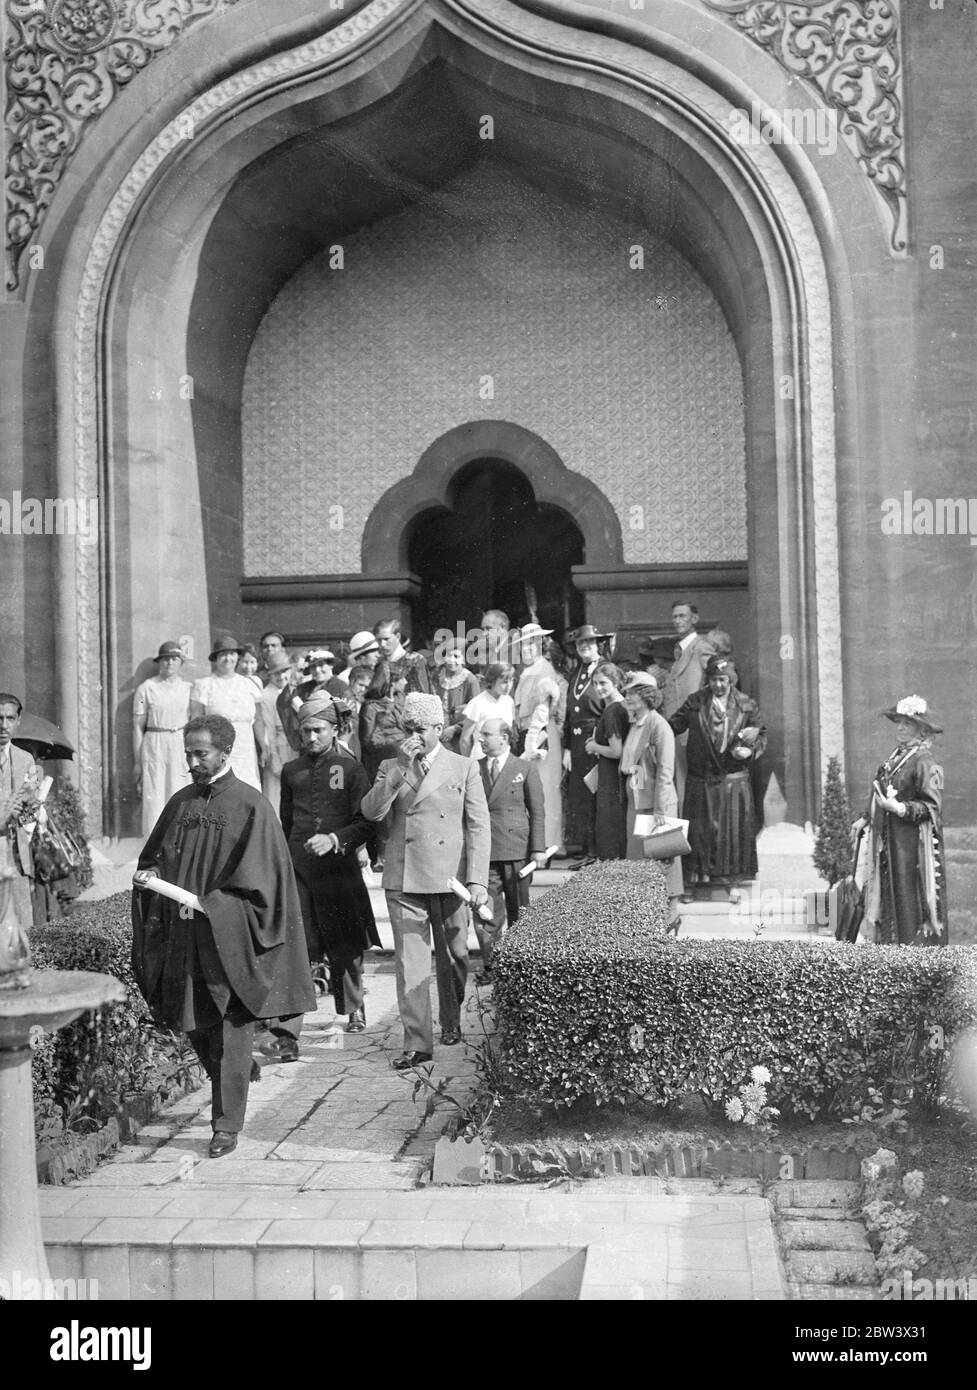 Emperor Haile Selassie of Ethiopia and members of his family and suite visited the Woking Mosque ( Surrey ) from Bath . The Moslem community gave an address of welcome , and Indian potentates were present . Photo shows : Emperor Haile Selassie at the Mosque . 25 Aug 1936 Original caption from negative The Shah Jahan Mosque was the first purpose built mosque in Europe outside of Muslim Spain Stock Photo